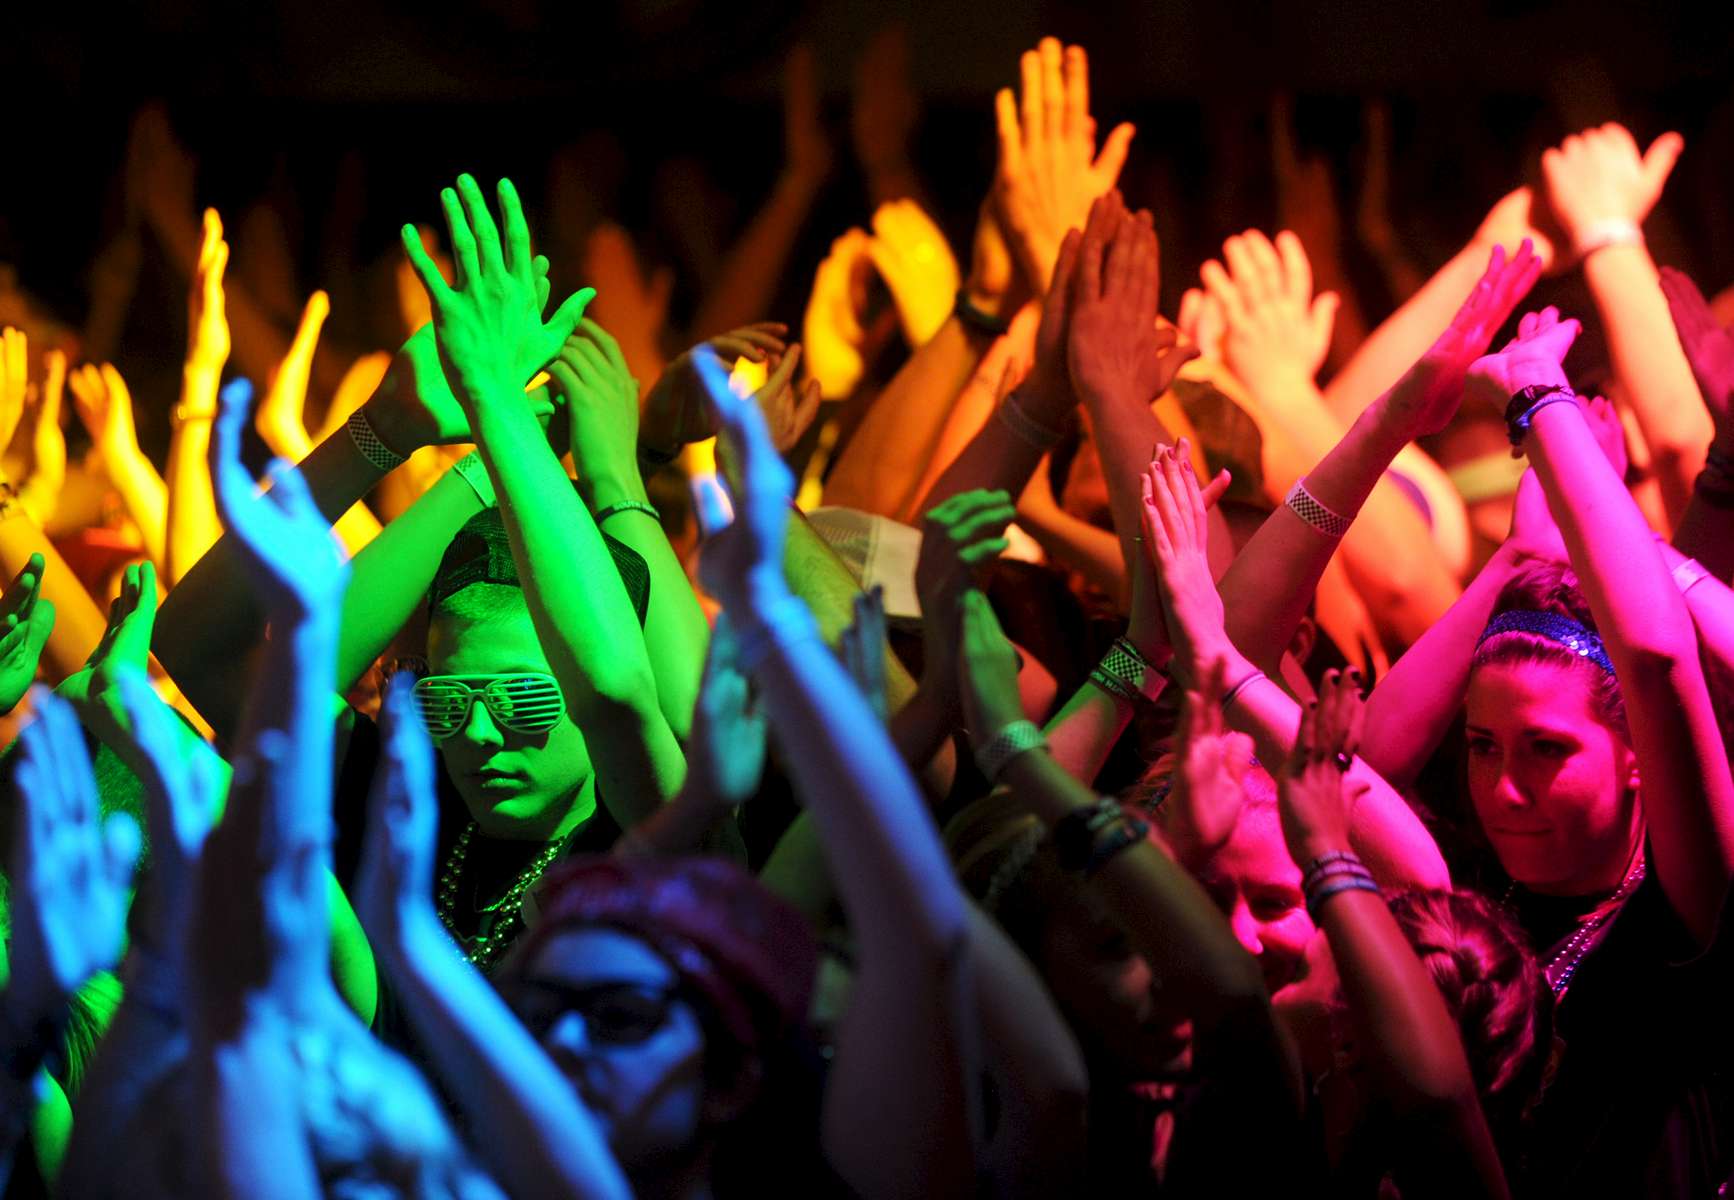 Jason McKibben - jmckibben@poststar.comSouth Glens Falls students are bathed in colored light as they participate in the 35th annual South High Marathon Dance on Friday, March 2, 2012. Hundreds took part in the charitable event that runs for 24 hours and raises money for causes and individuals selected by a student planning committee. Over $2.75 million has been raised over the previous 34 years, and organizers are hoping the total this year will top the $326,213.58 brought in last year.